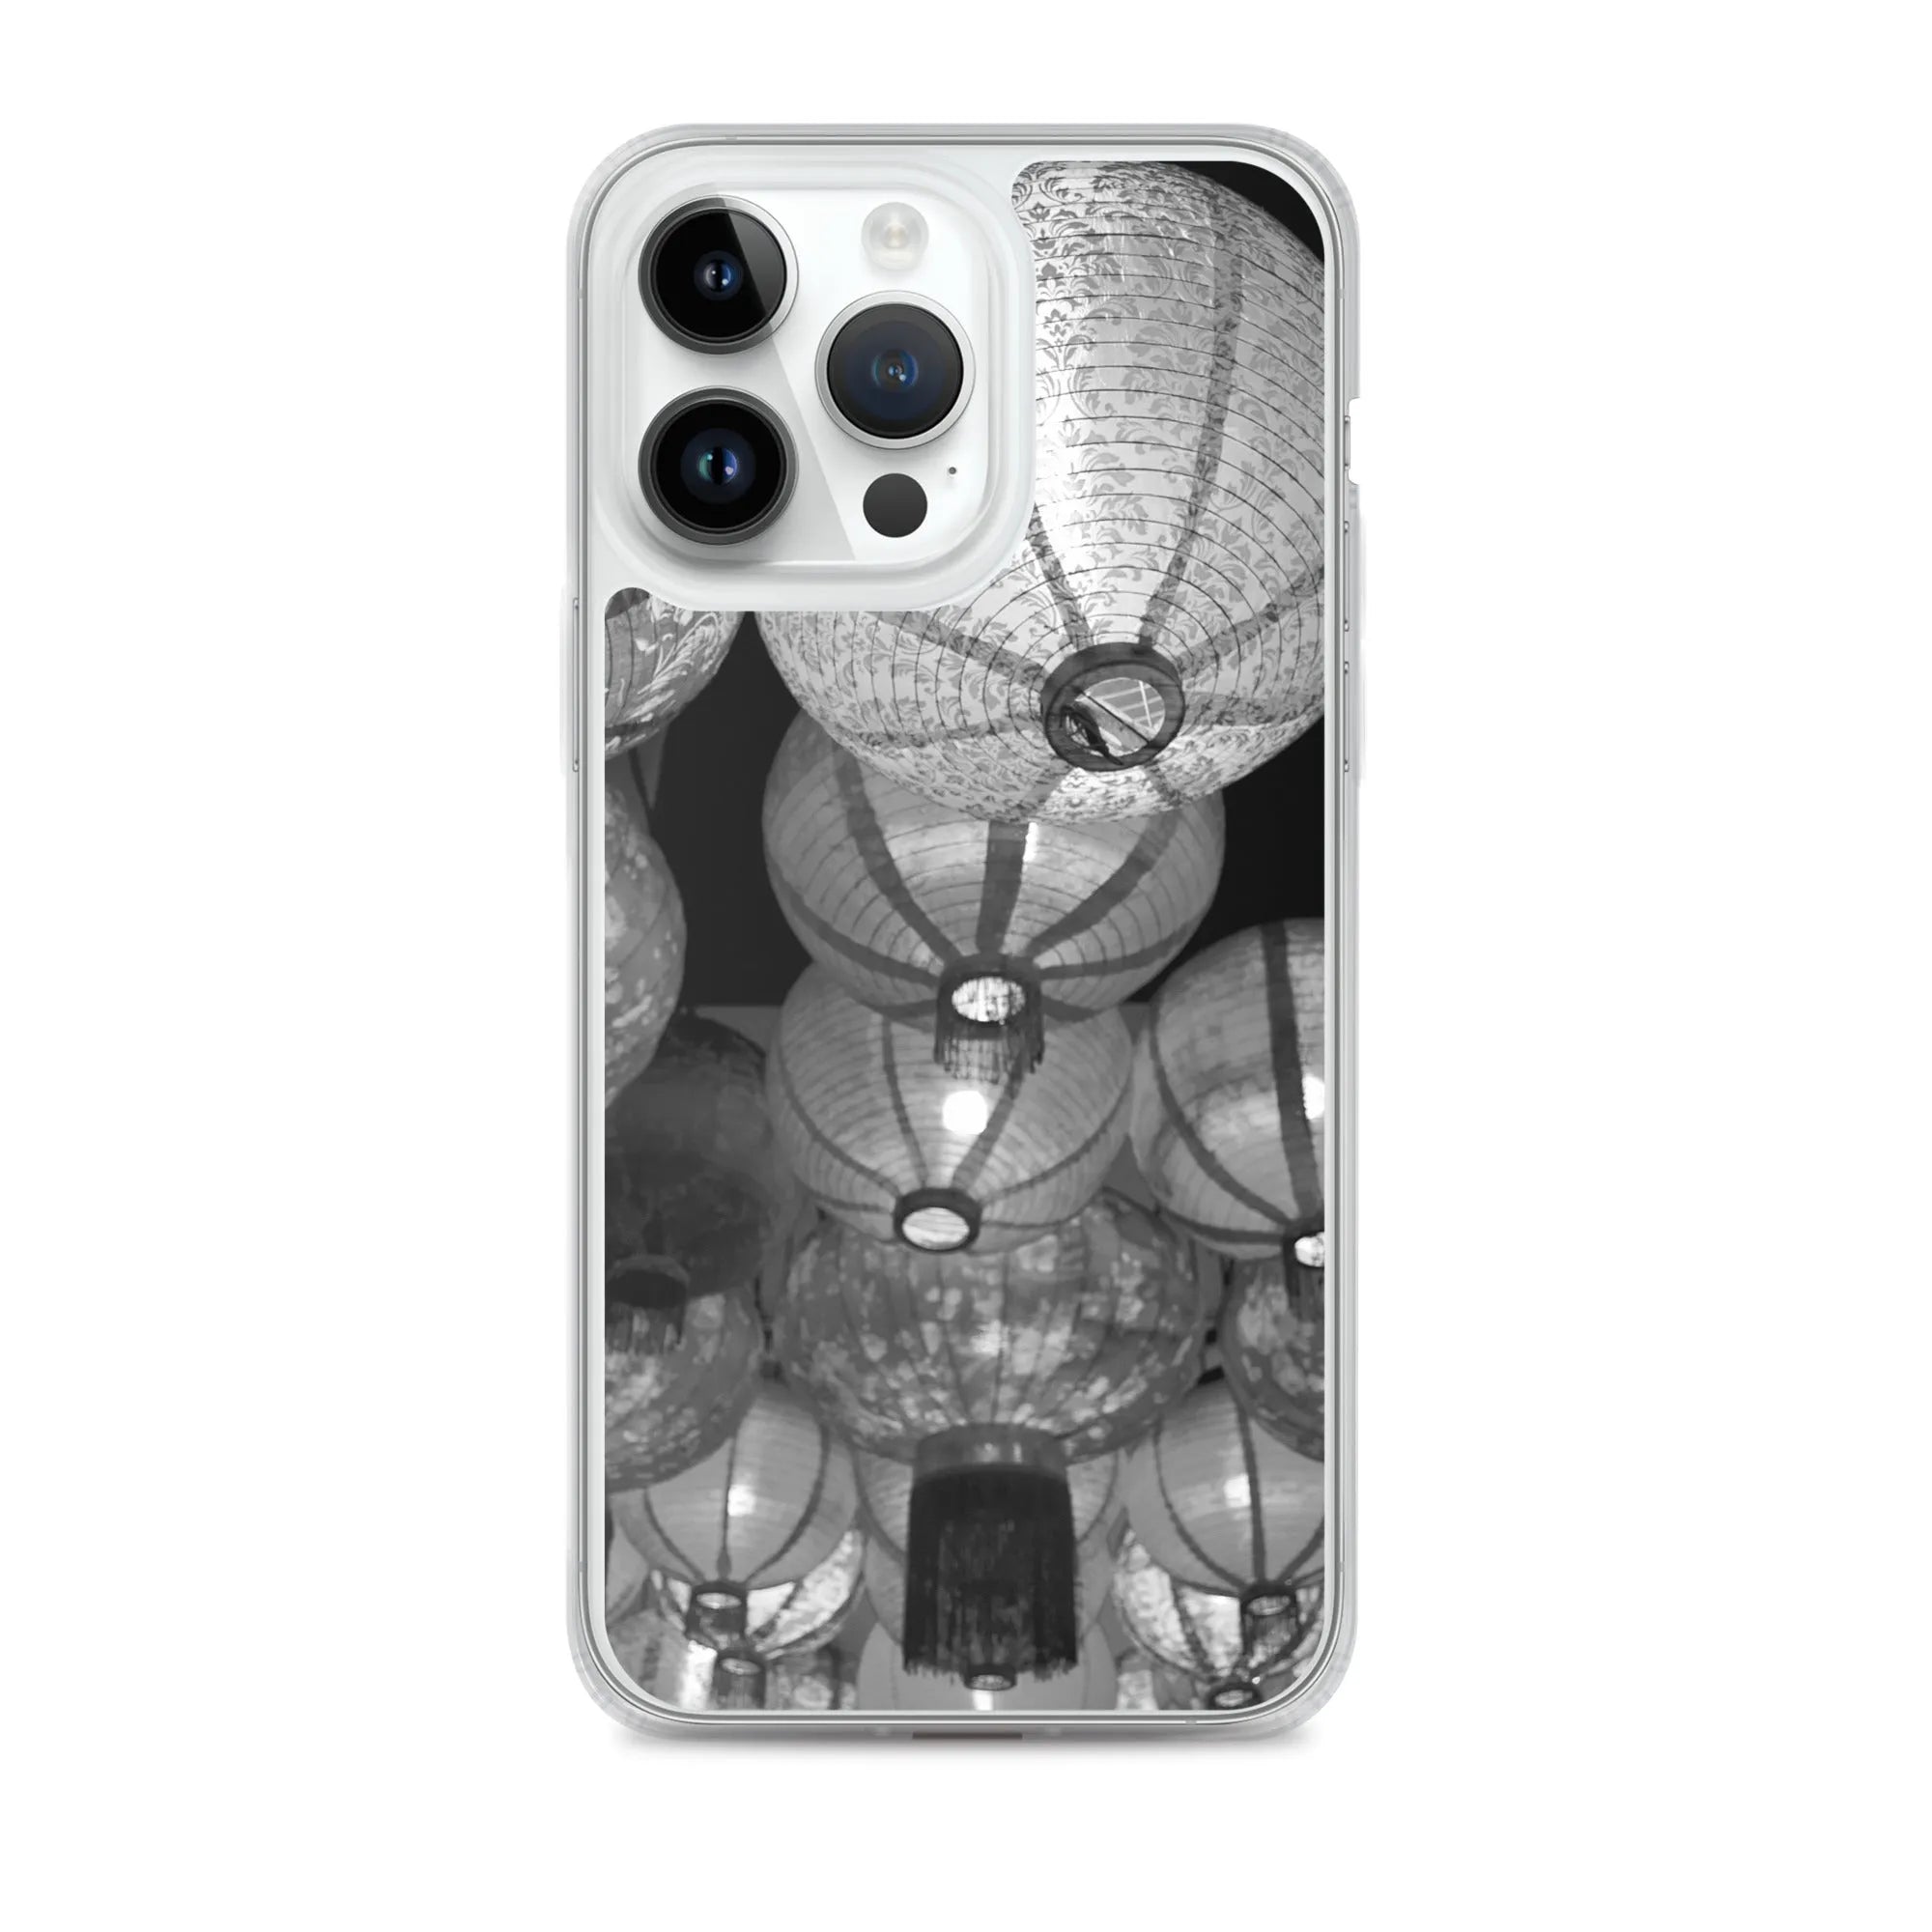 Raise The Red Lanterns - Designer Travels Art Iphone Case - Black And White - Iphone 14 Pro Max - Mobile Phone Cases